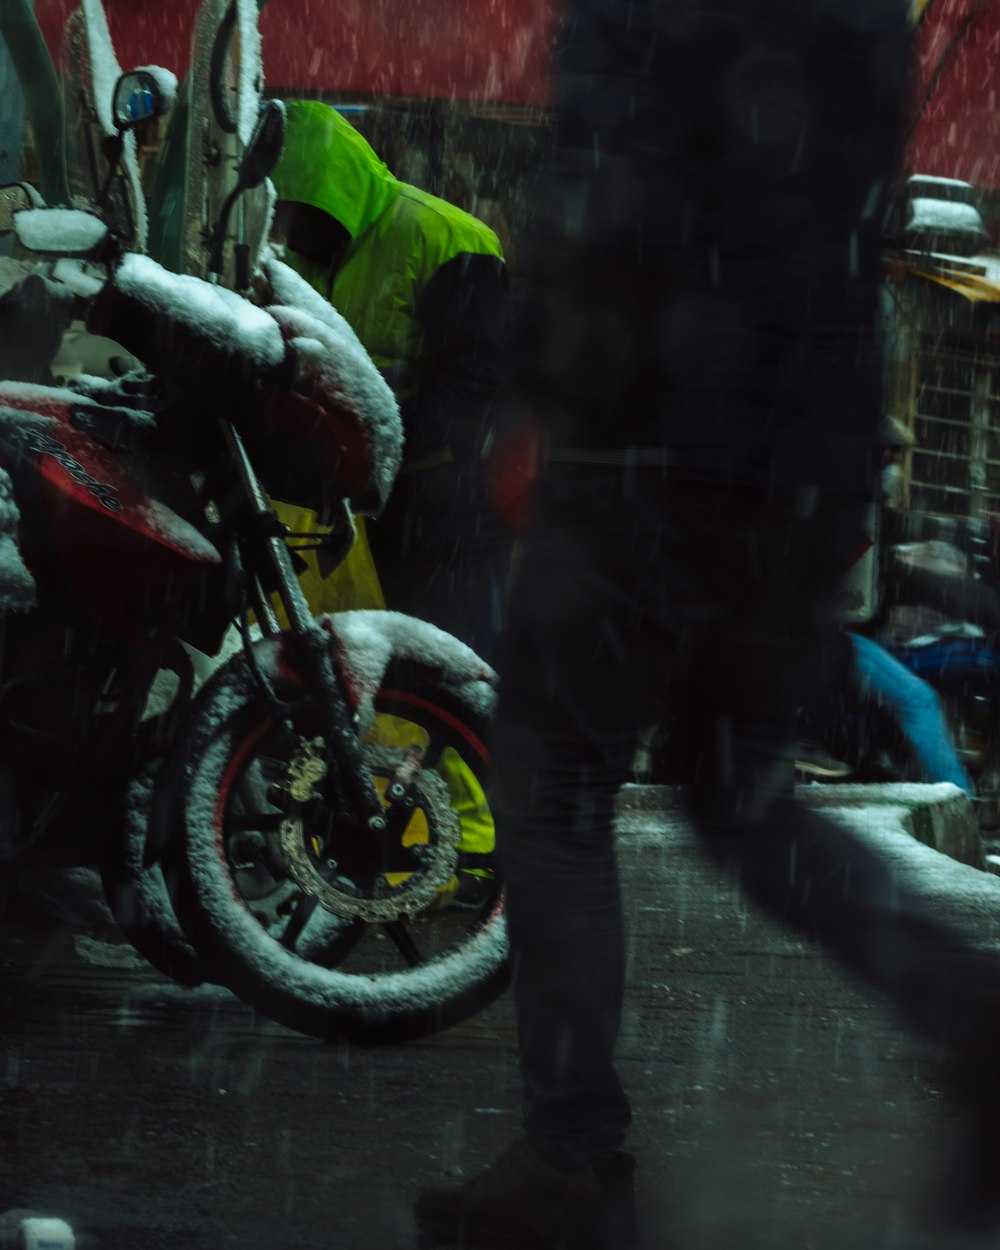 a person standing next to a motorcycle in the snow